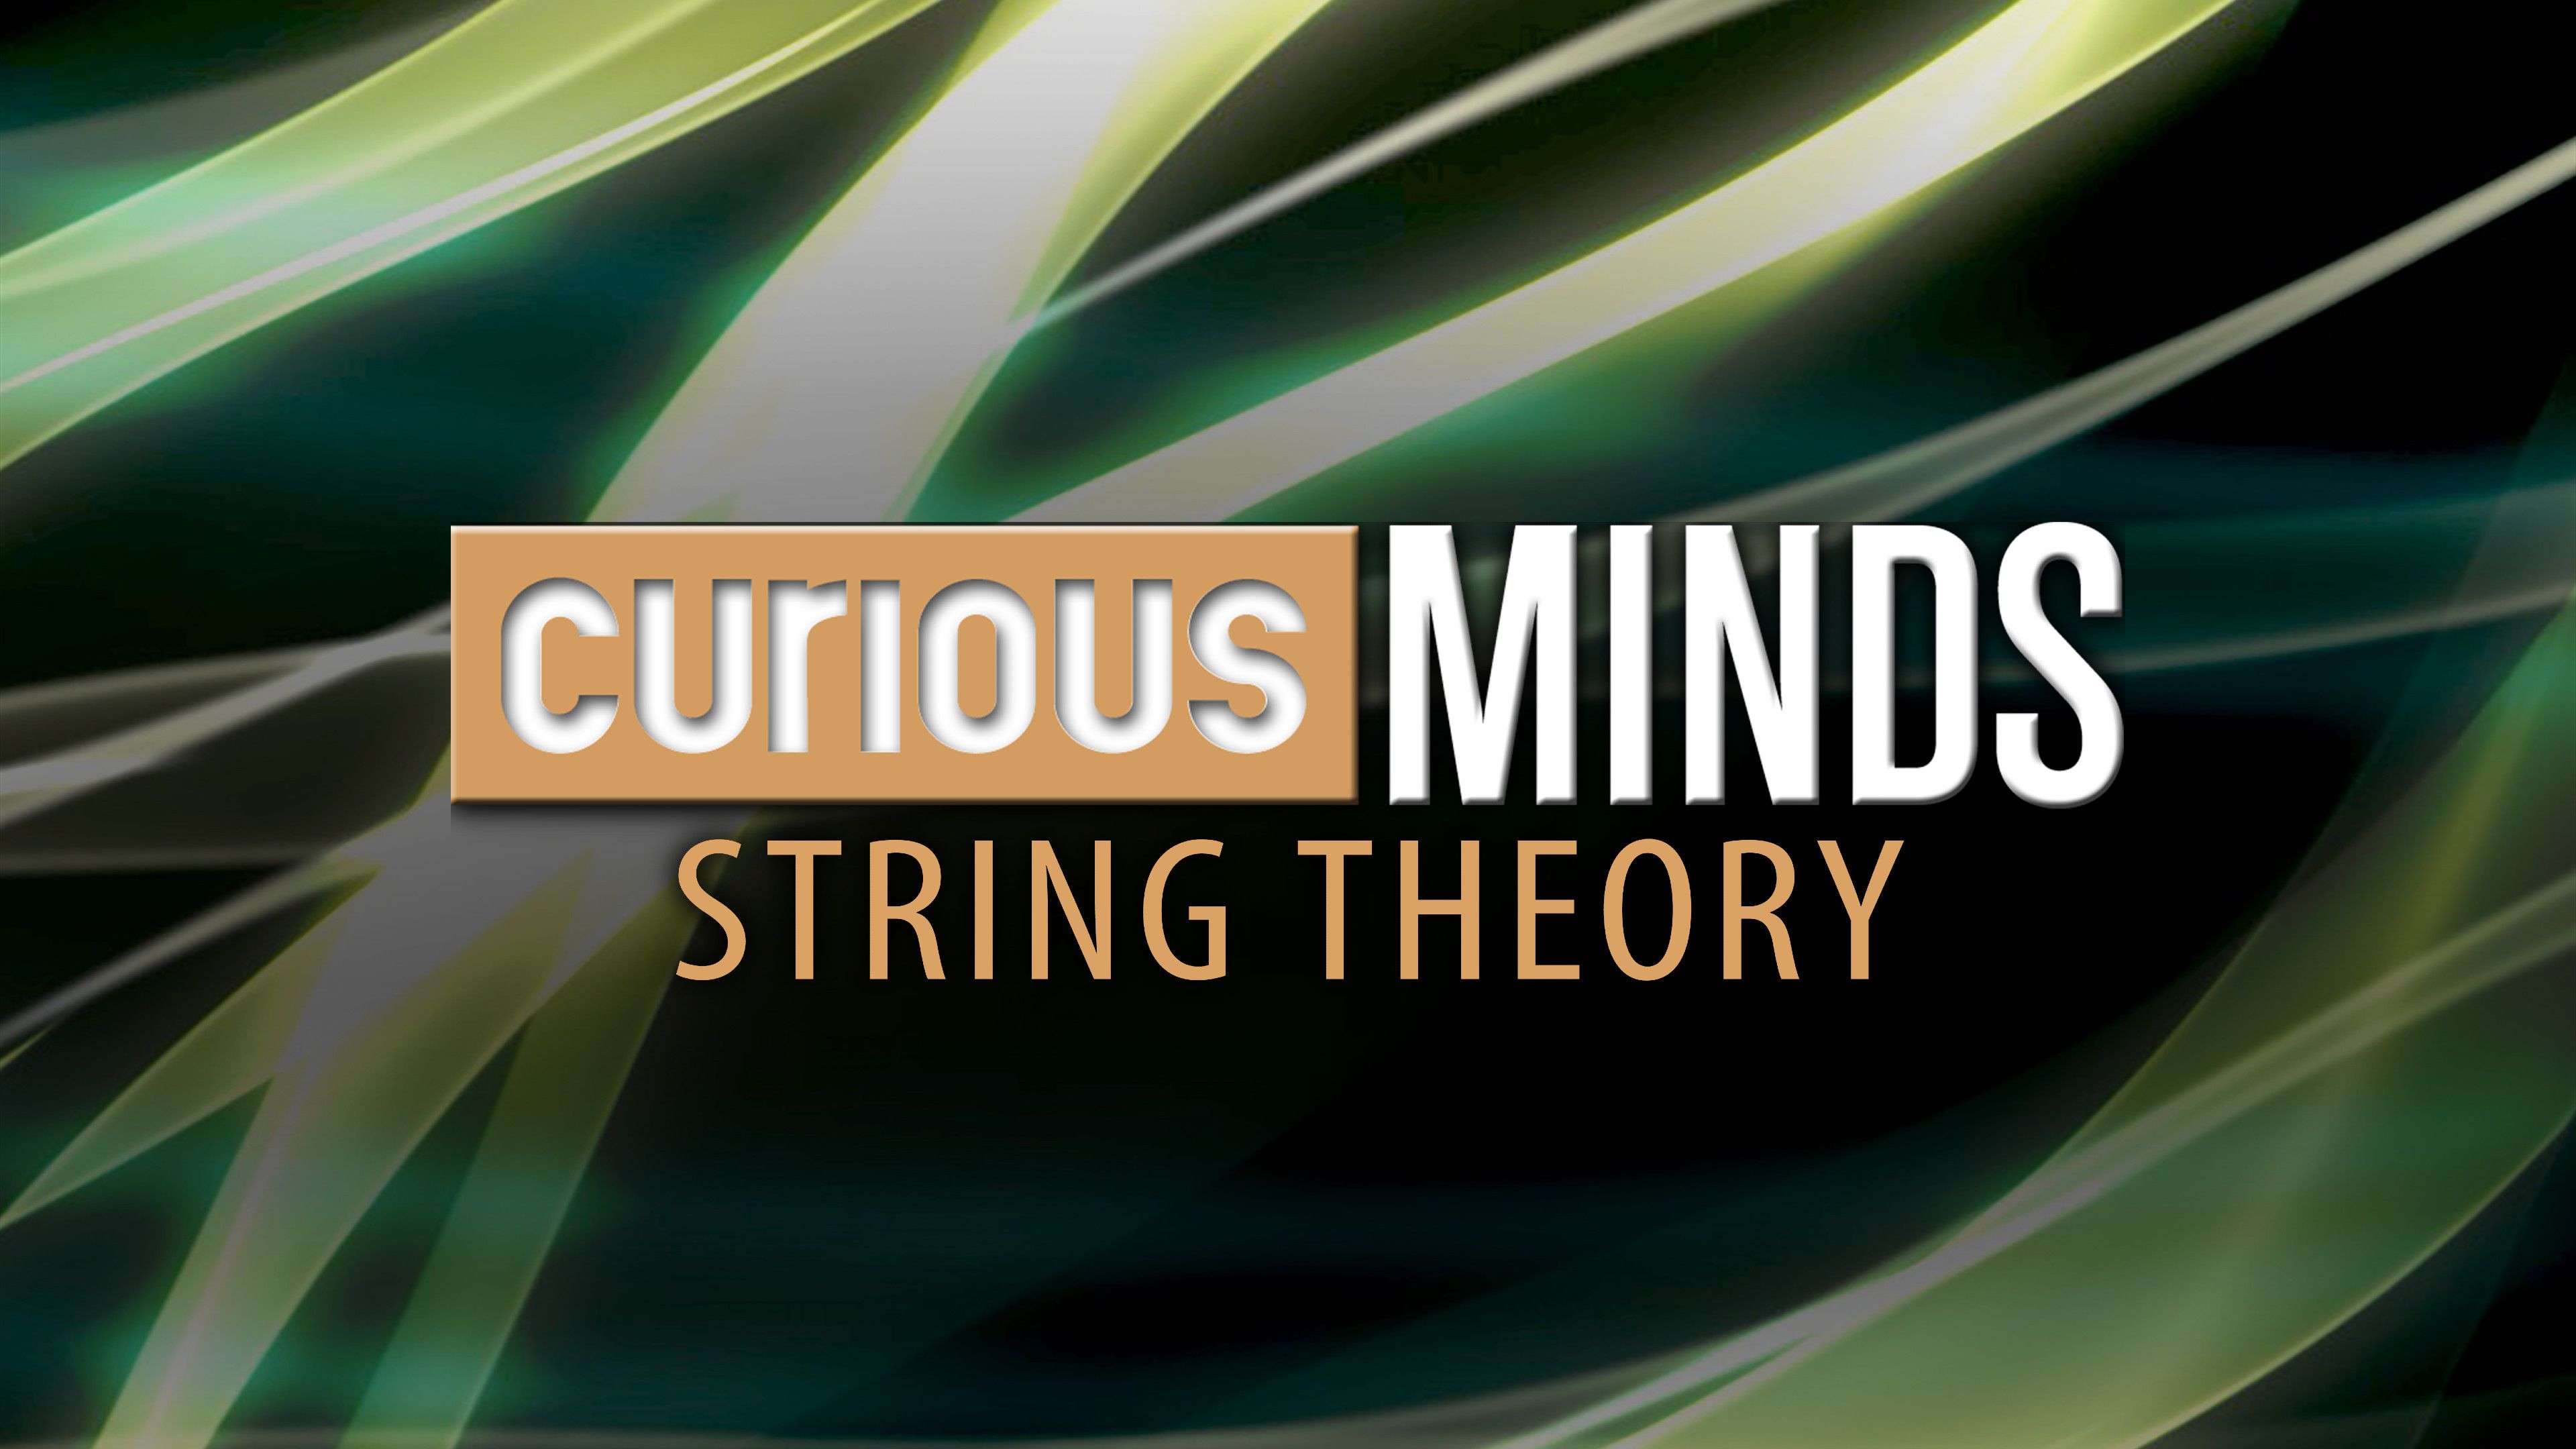 Curious Minds: String Theory